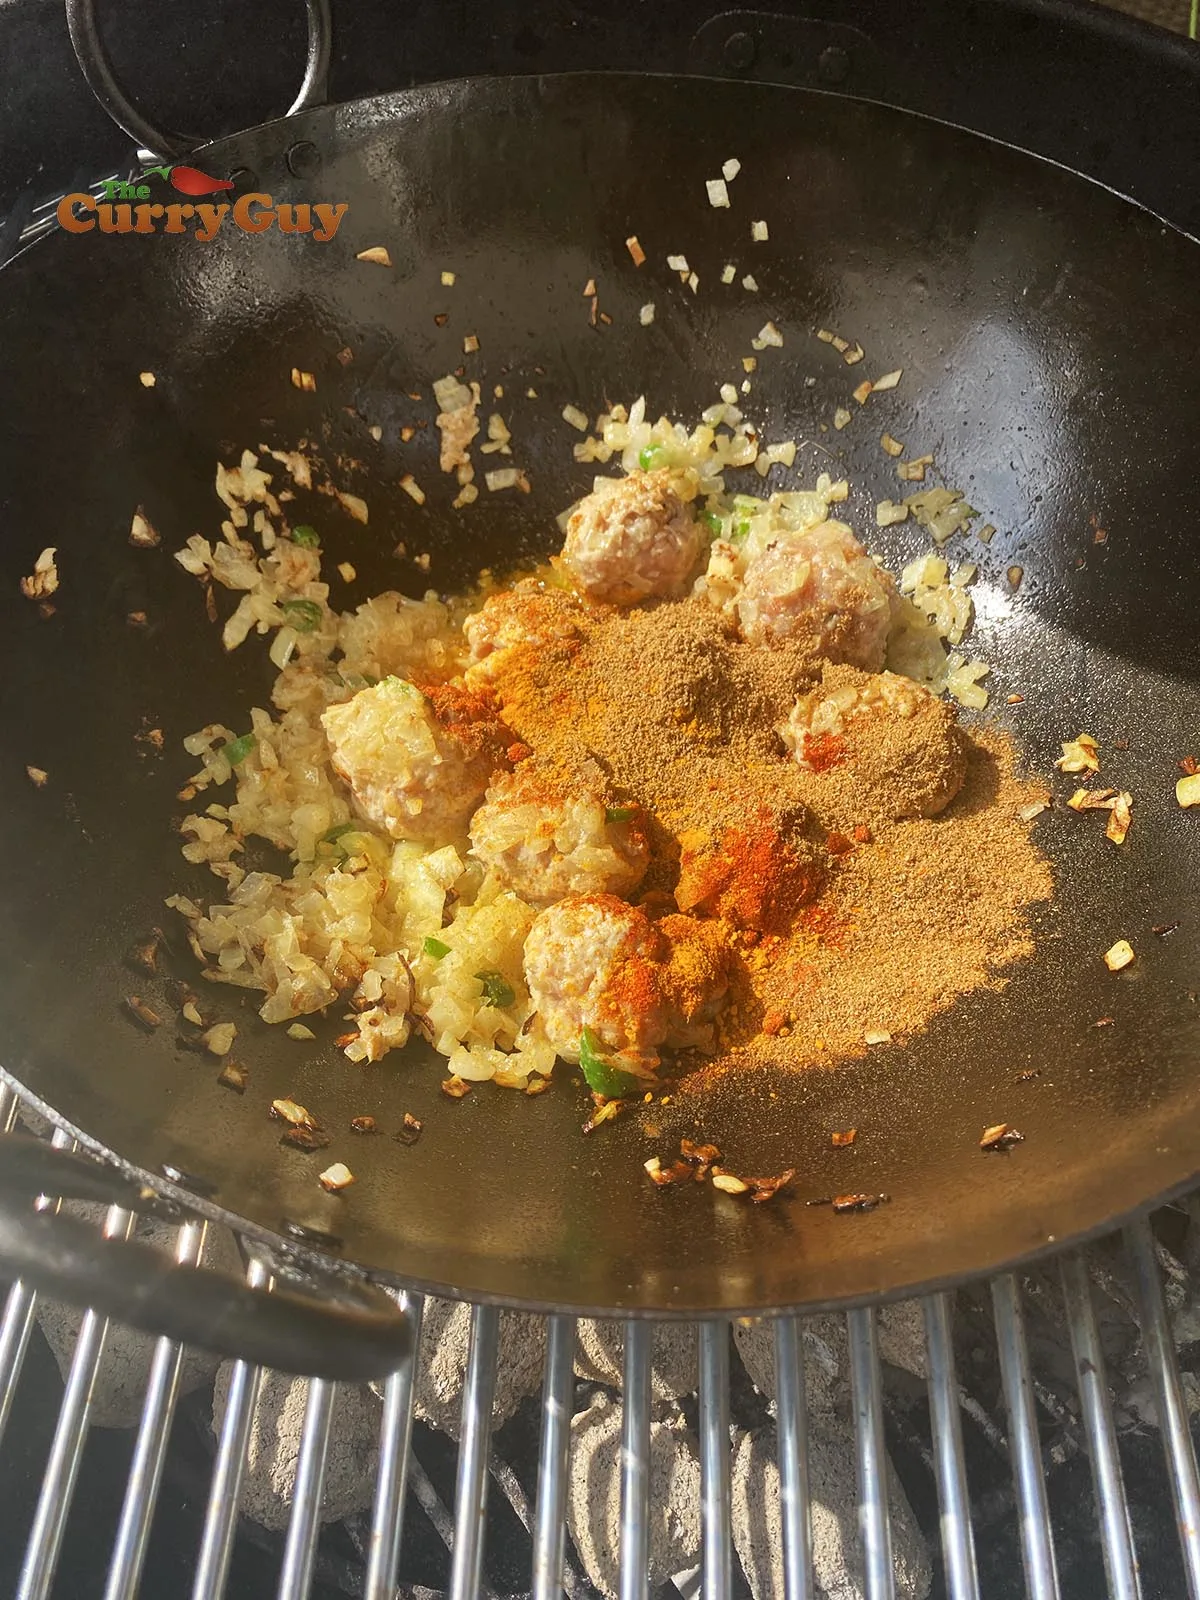 Adding ground spice to the sauce